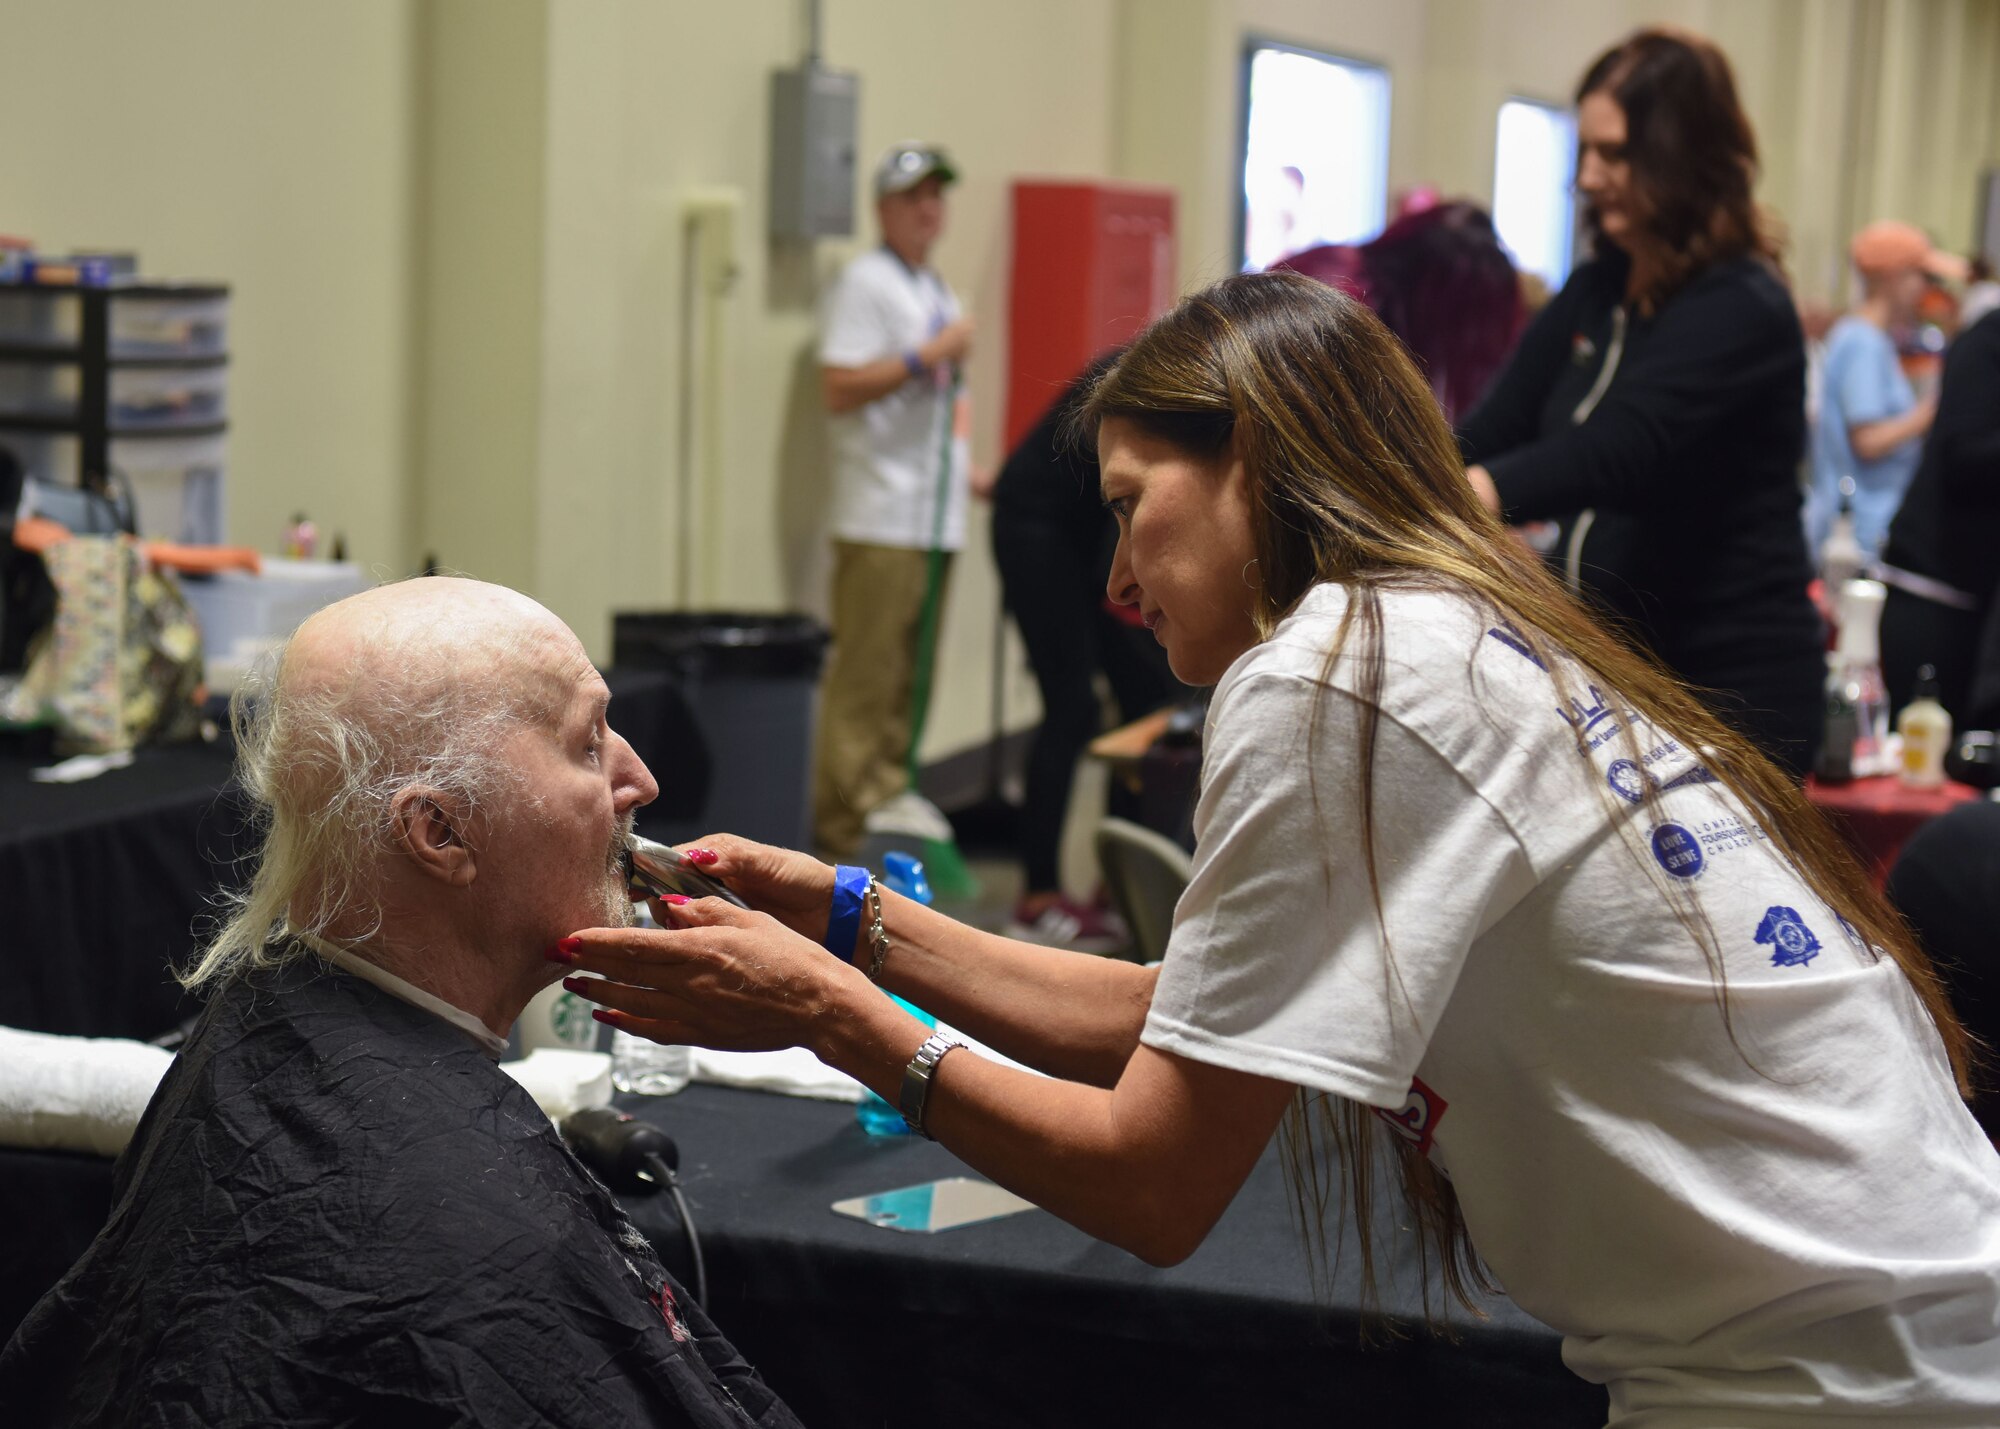 A local veteran receives a haircut and trim by a Veteran Stand Down volunteer Oct. 20, 2018 at the Santa Maria Fair Grounds, Calif. Over 180 services were offered for the veterans in need in the local community.